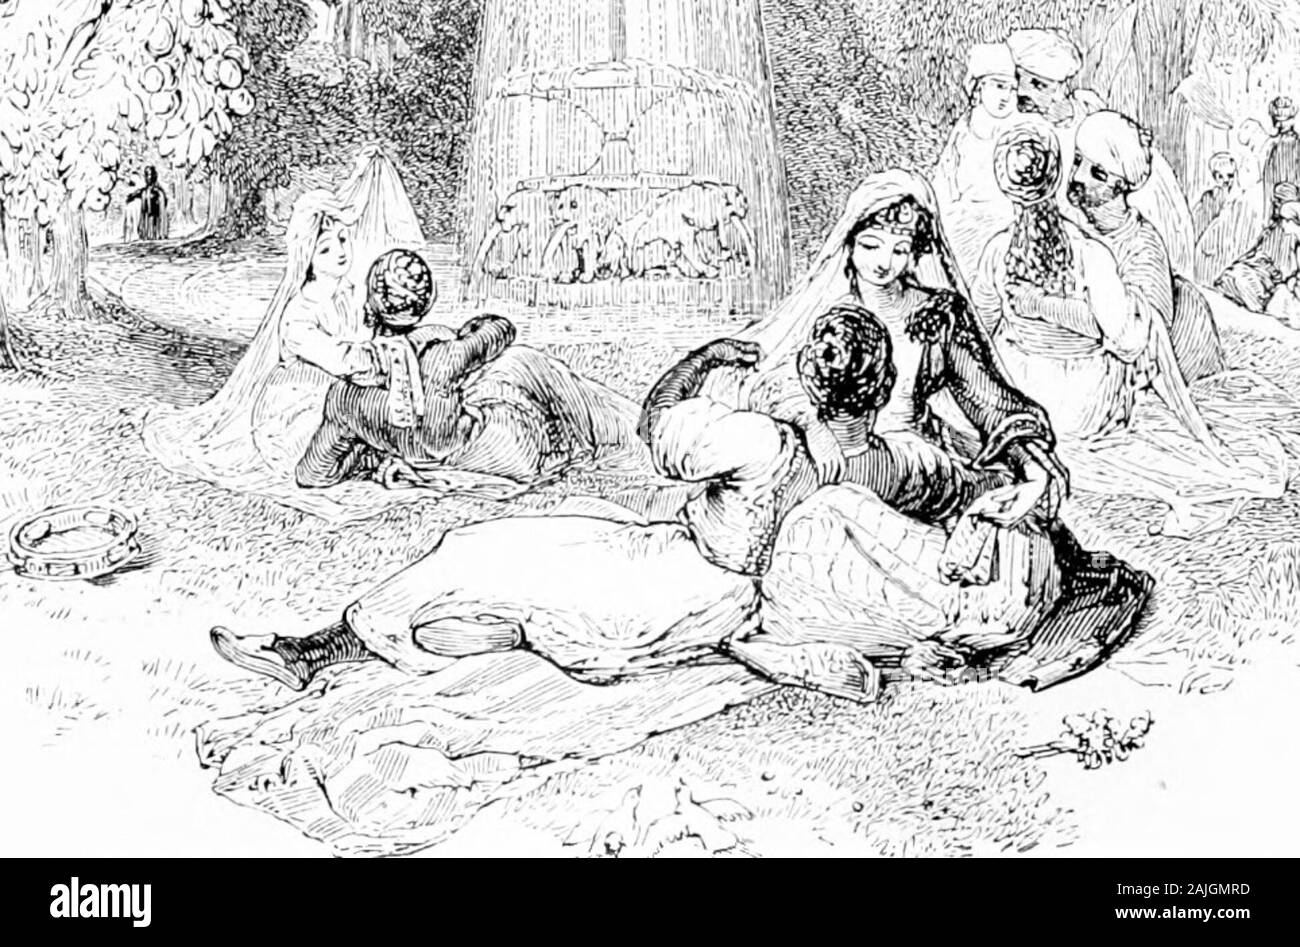 The thousand and one nights (Volume 1): commonly called, in England, the Arabian nights' entertainments . he disguised himself, and returned to his brother in thepalace, and sat in one of the windows overlooking the garden; andwhen he had been there a short time, the women and their mistressentered the garden with the black slaves, and did as his brother haddescribed, continuing so until the hour of the afternoon-prayer. When King Shahriyar beheld this occurrence, reason fled from hishead, and he said to his brother Shah-Zemiin, Arise, and let us travelwhither we please, and renounce the regal Stock Photo